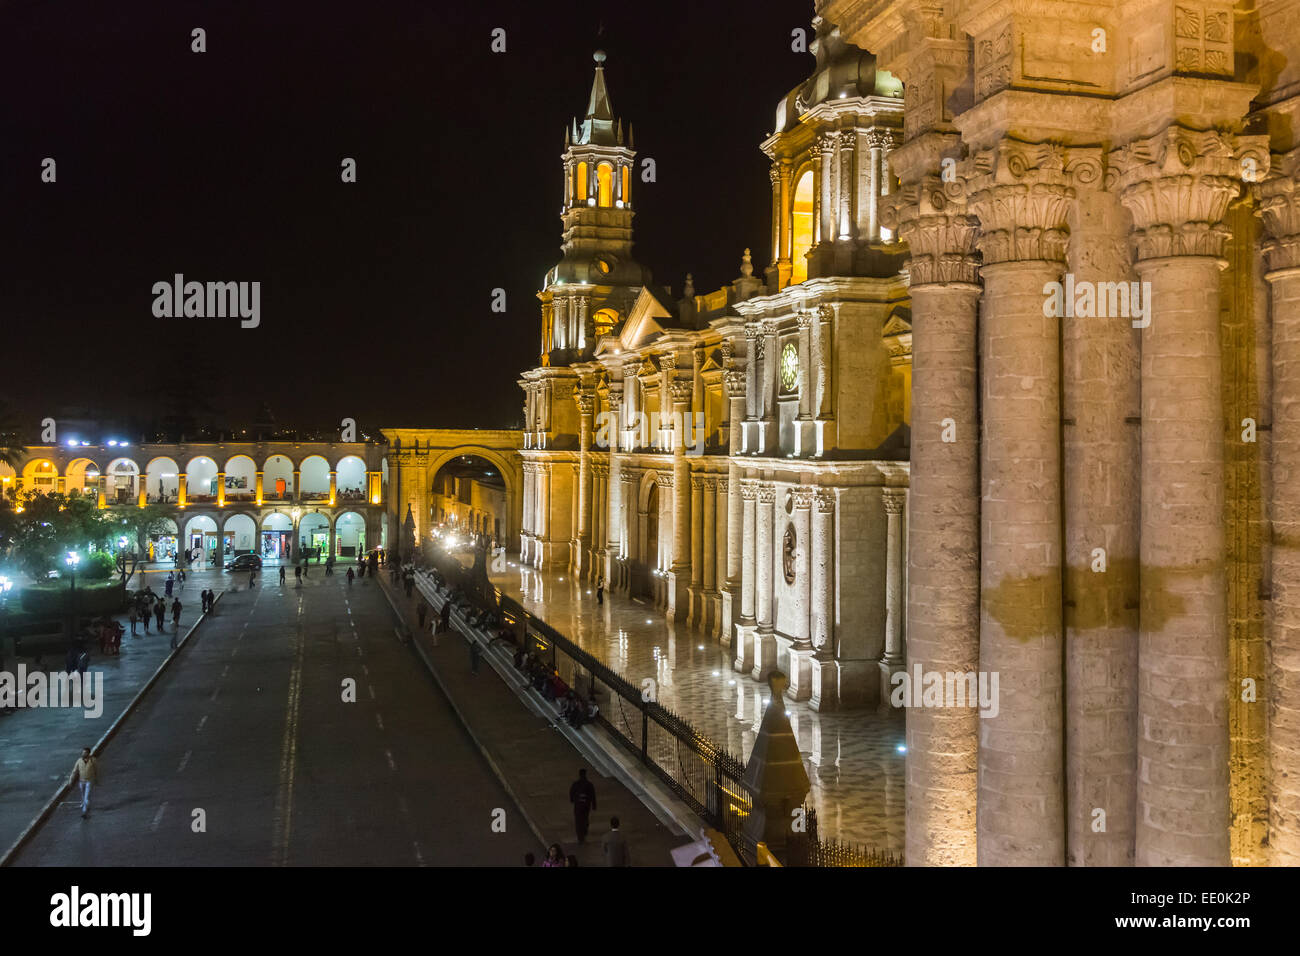 View of the floodlit front facade of the iconic Basilica Cathedral of Arequipa floodlit at night, Plaza de Armas, downtown Arequipa, Peru Stock Photo